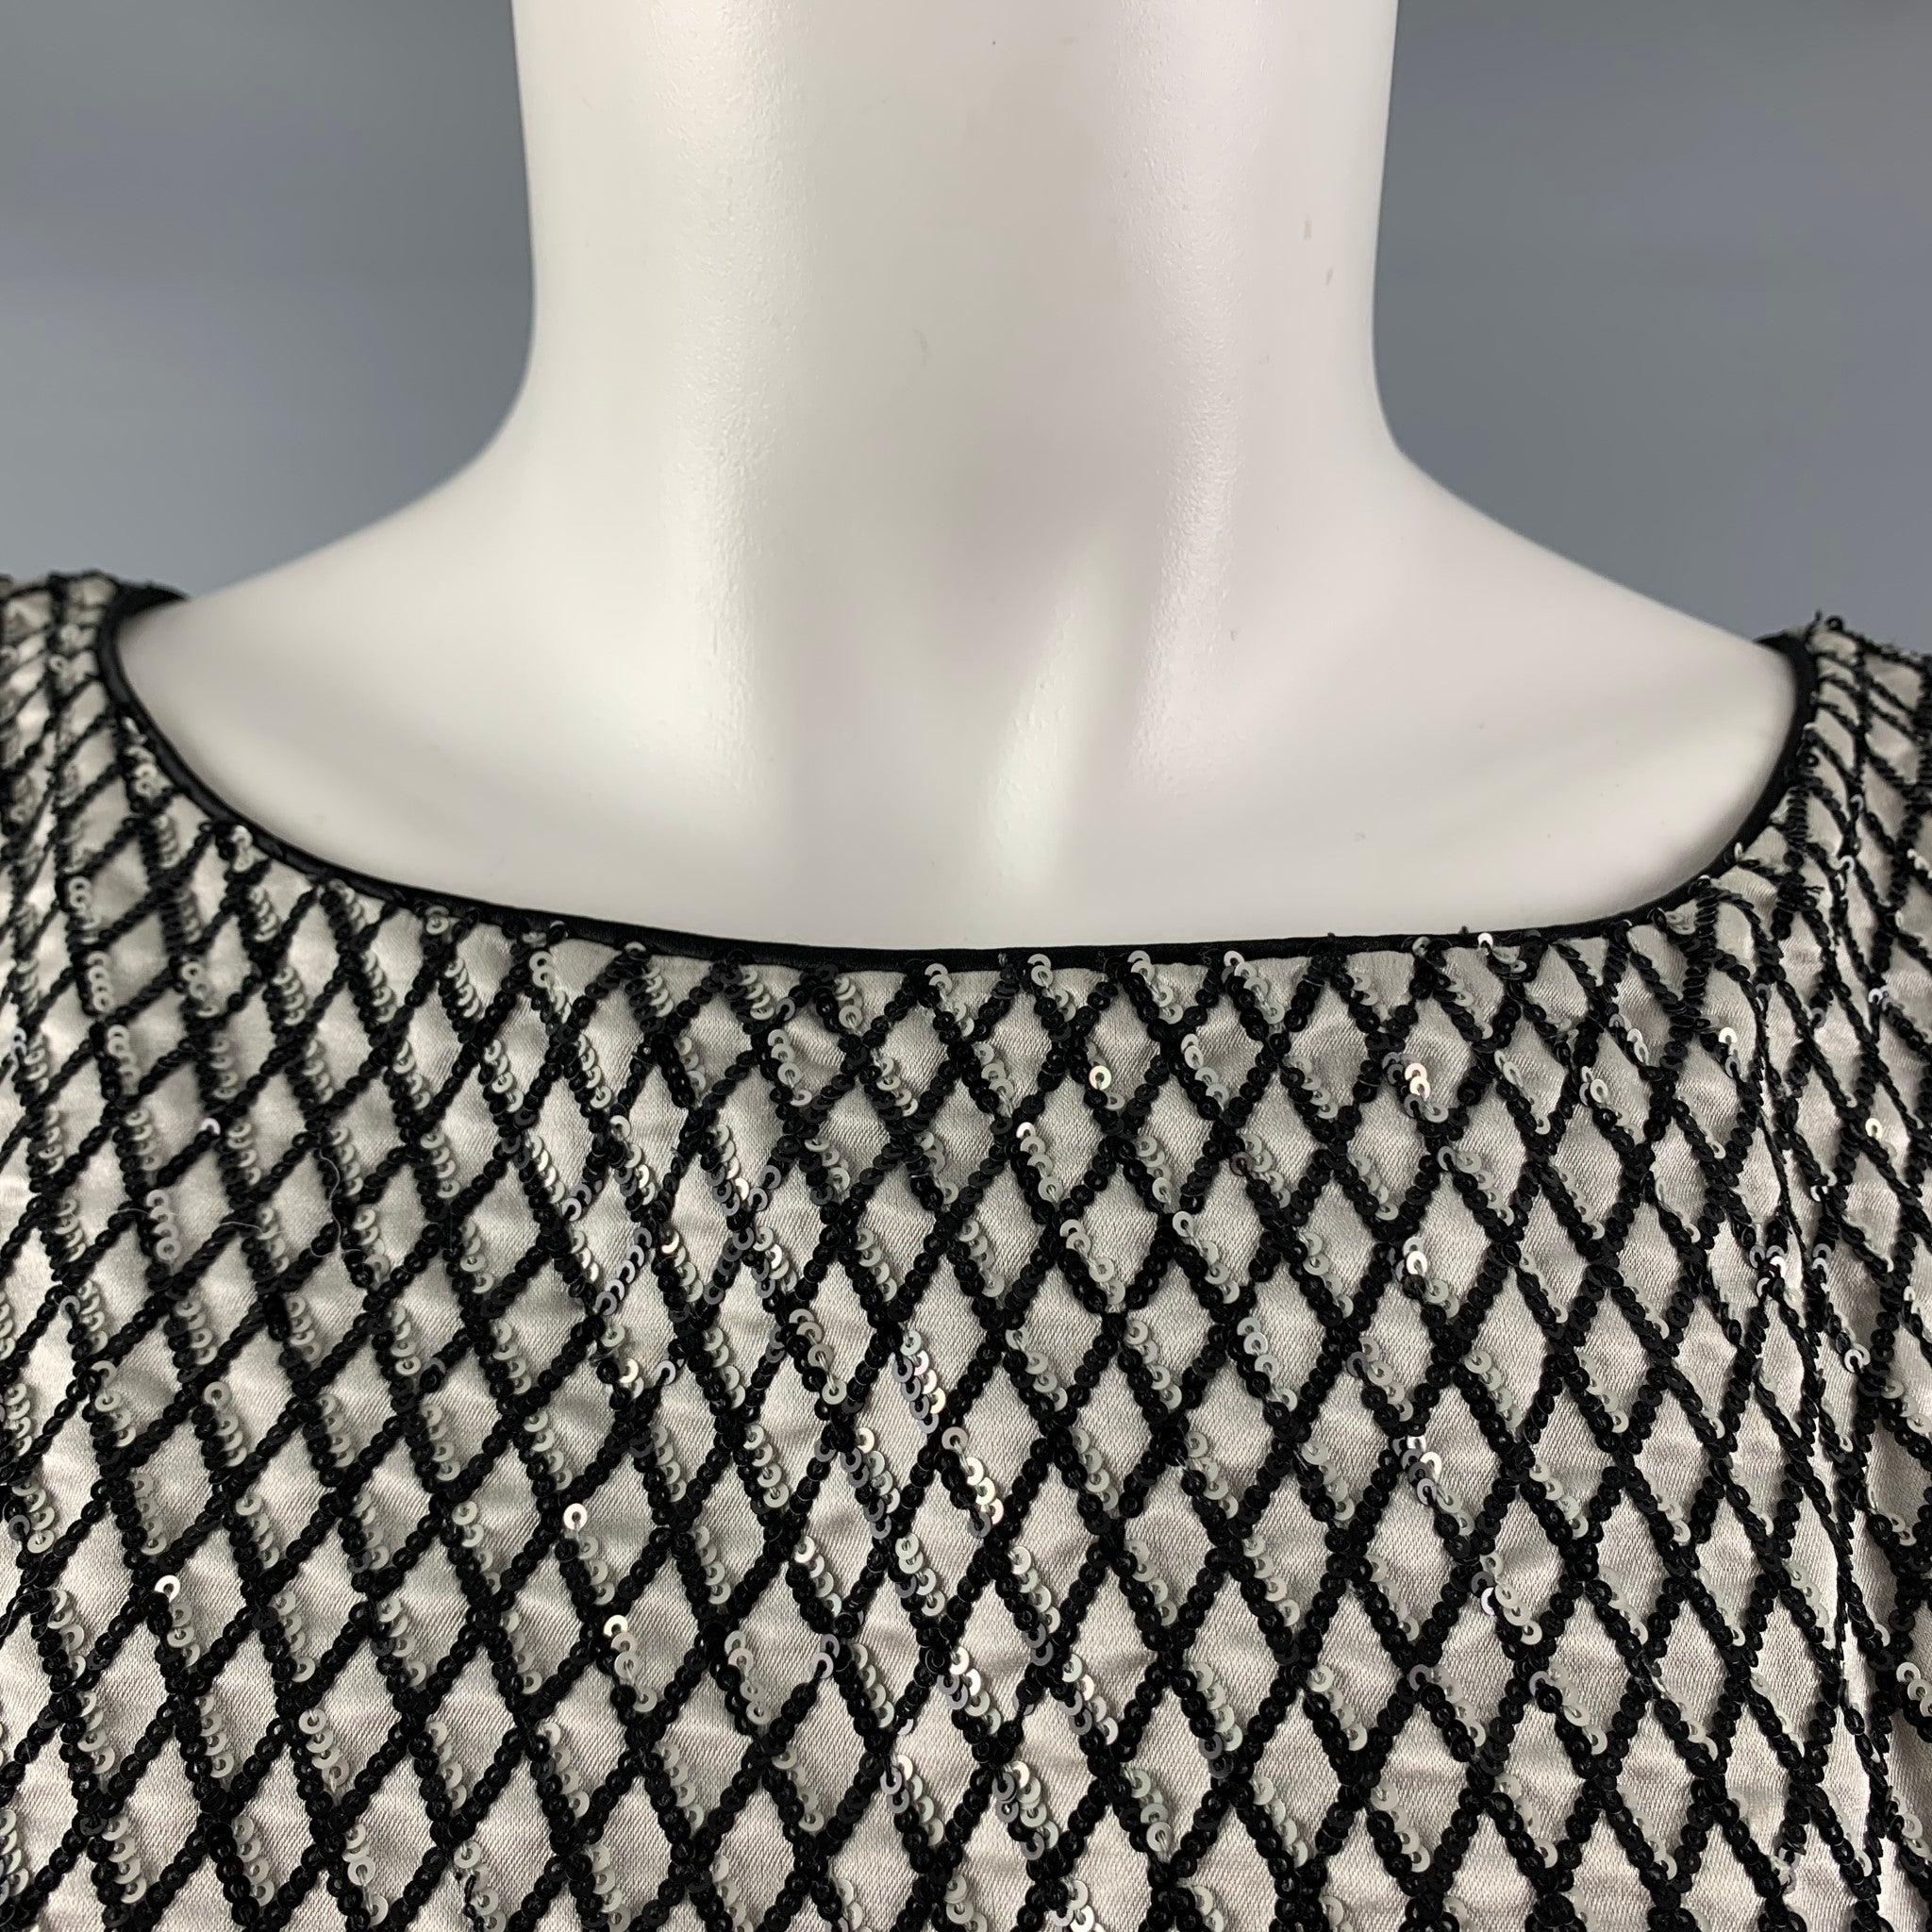 MARC JACOBS dress comes in a gray and black sequined silk featuring a shift style, sleeveless, and a back zip up closure. Made in USA. Excellent Pre-Owned Condition. 

Marked:   0 

Measurements: 
 
Shoulder: 15 inches Bust: 32 inches Waist: 28